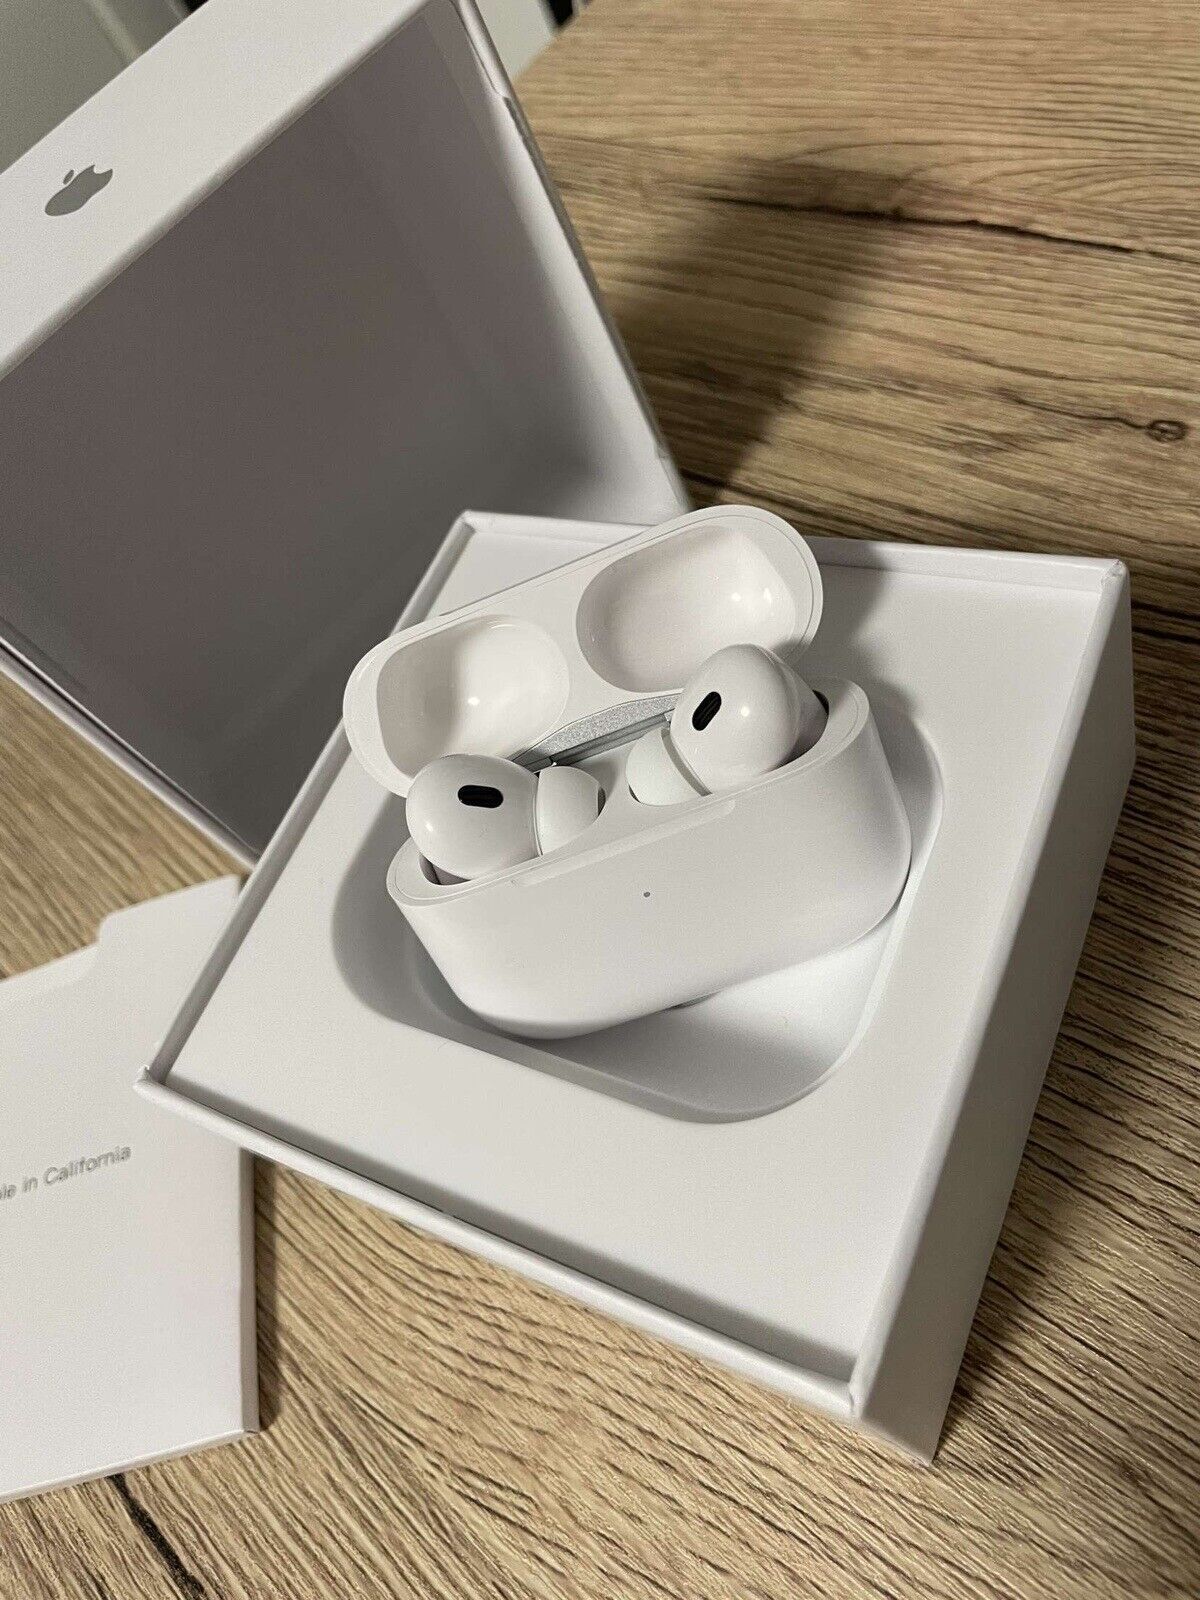 AppIe AirPods Pro (2nd Generation) Earphone Wireless with  Brand new open only